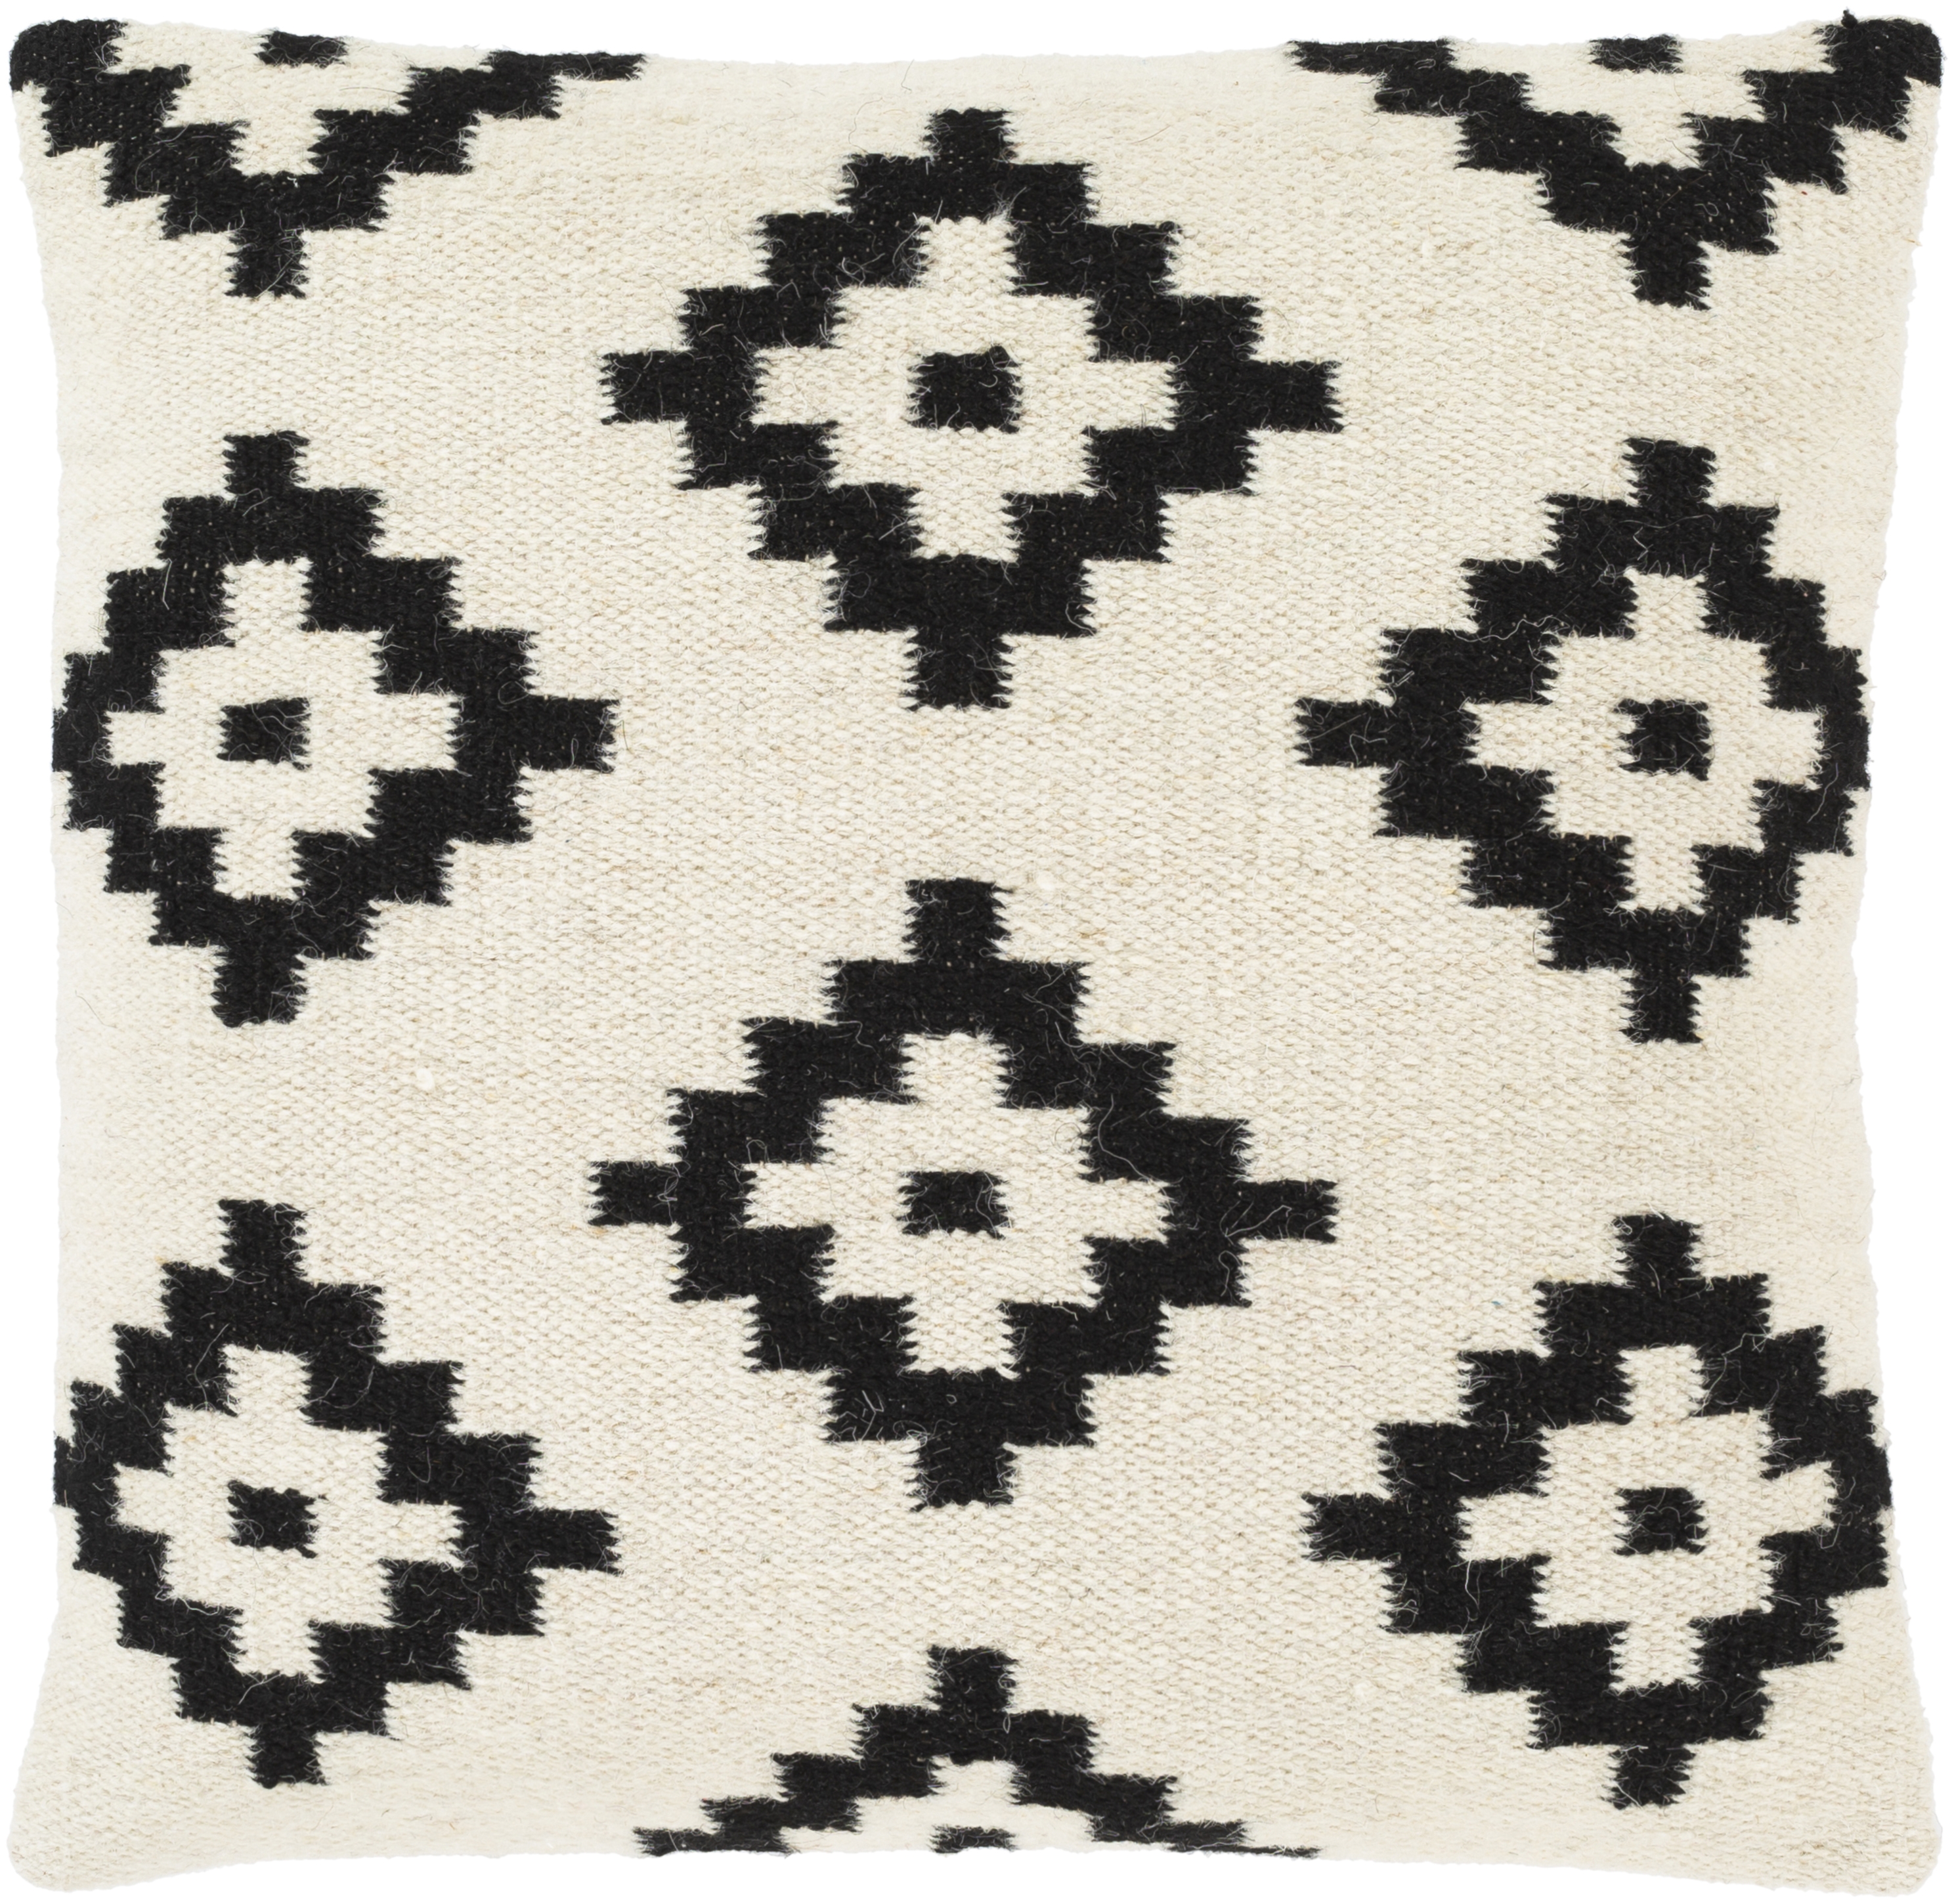 Shiprock Throw Pillow, 20" x 20", with down insert - Image 0